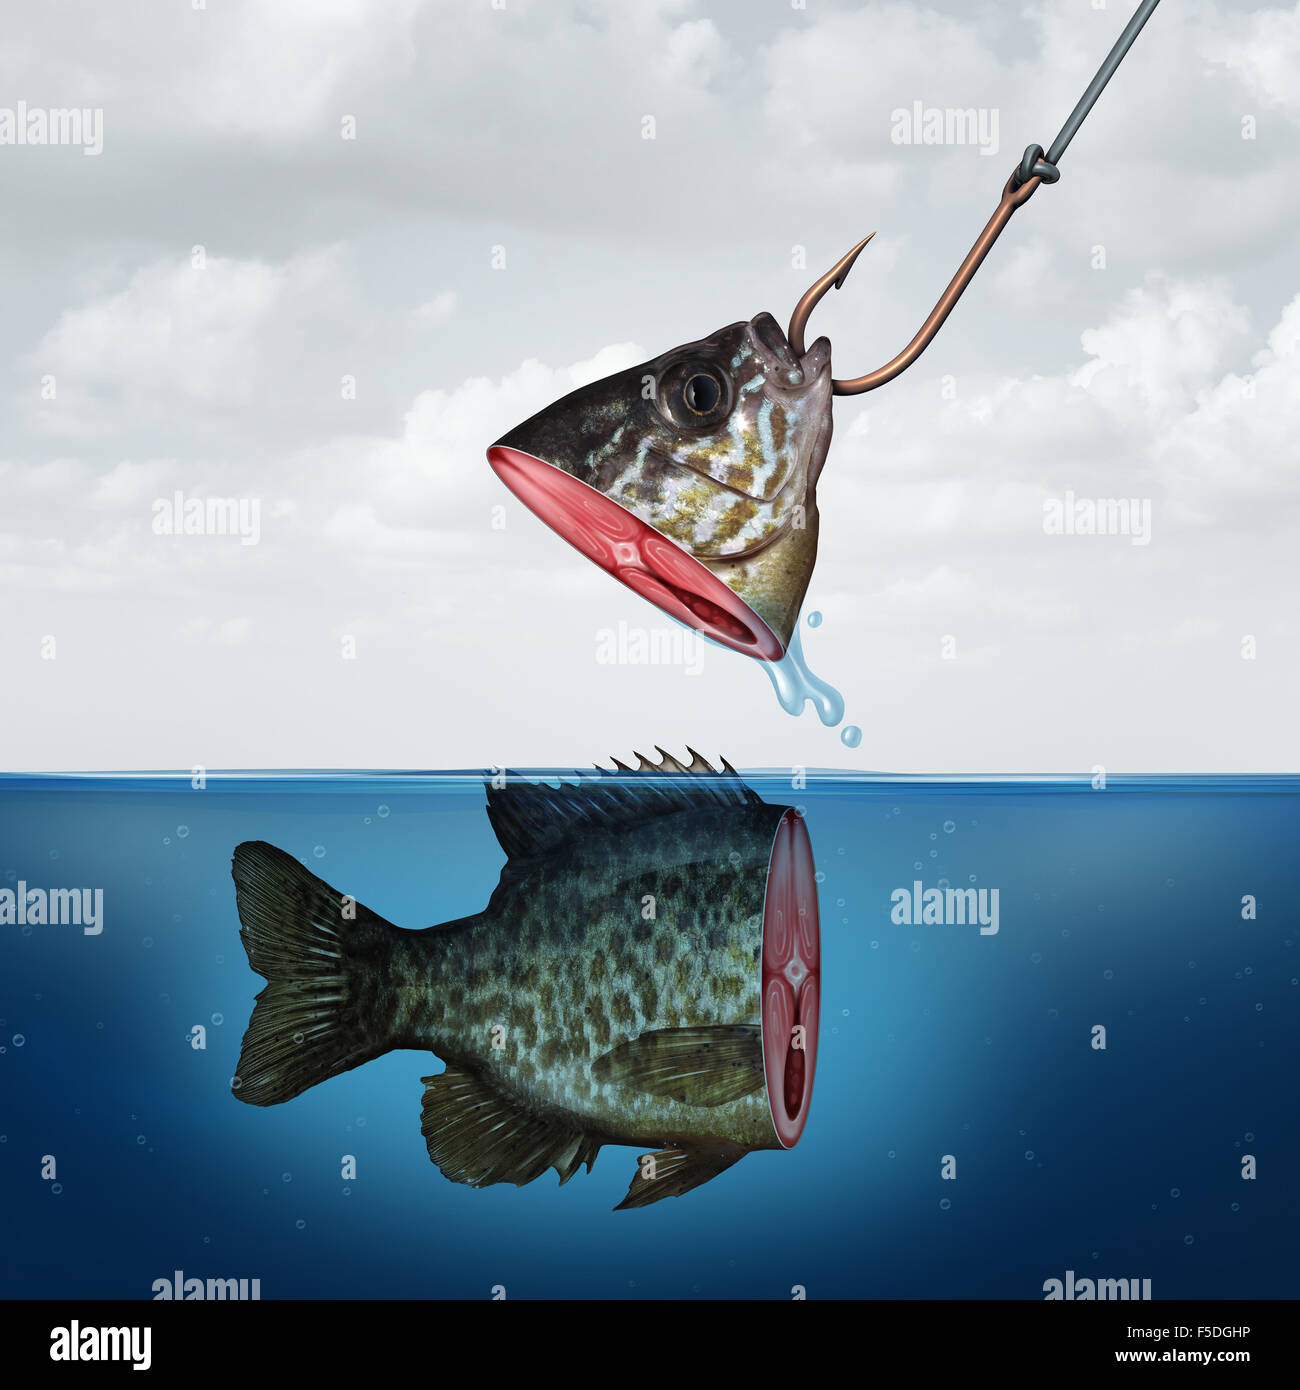 Disappointing profit business concept as a partial fish head on a hook with tehe rest of its body still in the water as a symbol for false promise and underperformance. Stock Photo